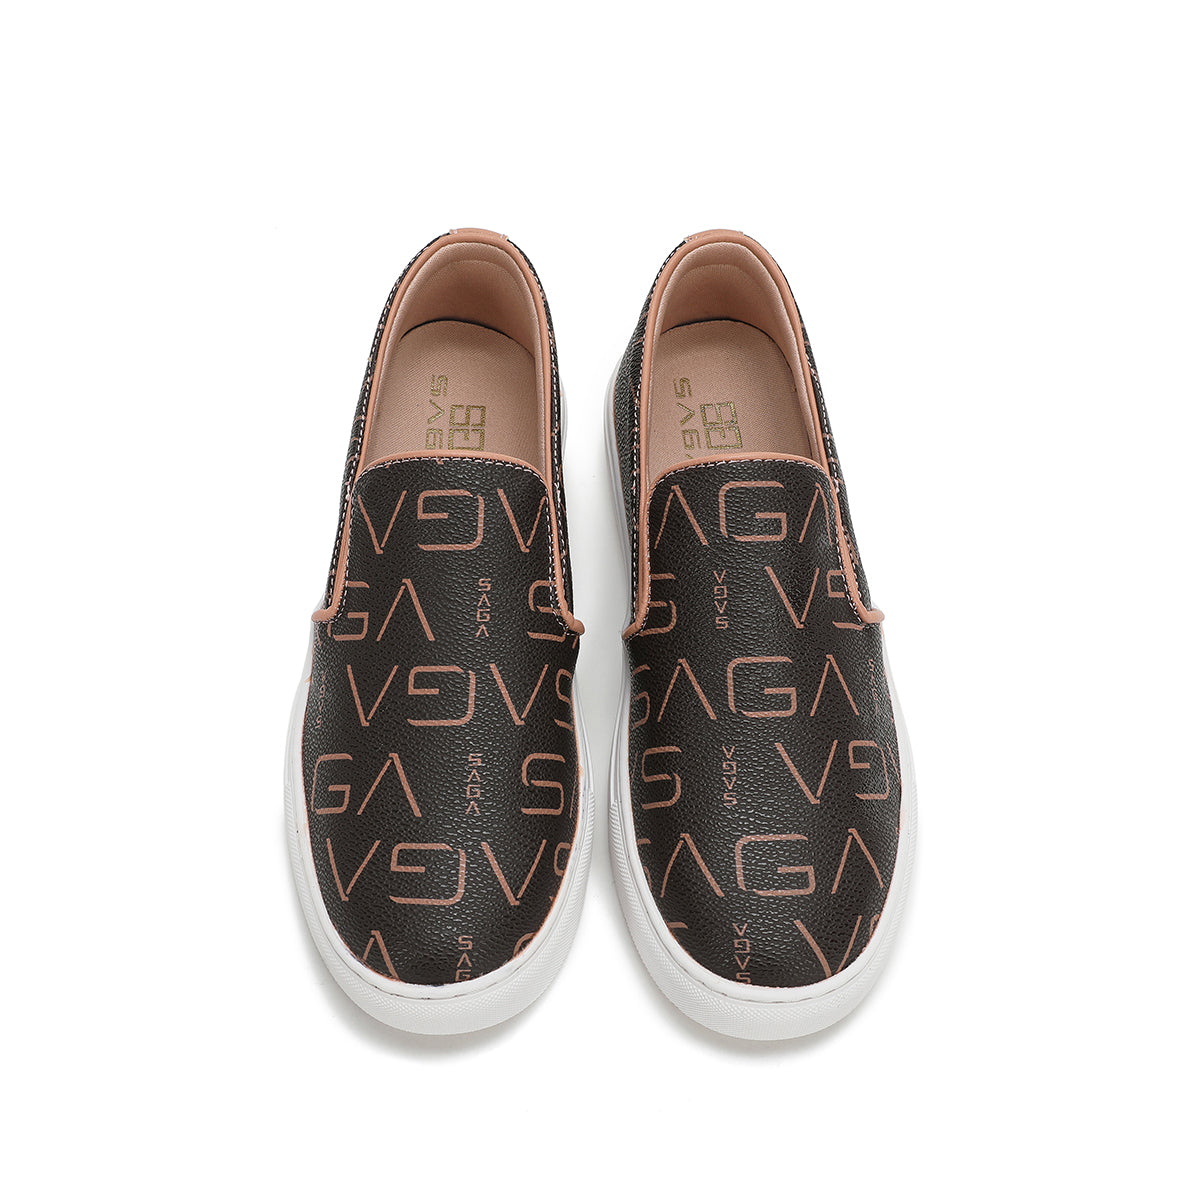 Saga Women's Light and Comfortable Microfiber Slip-On Shoes with Monogram Design in Coffee